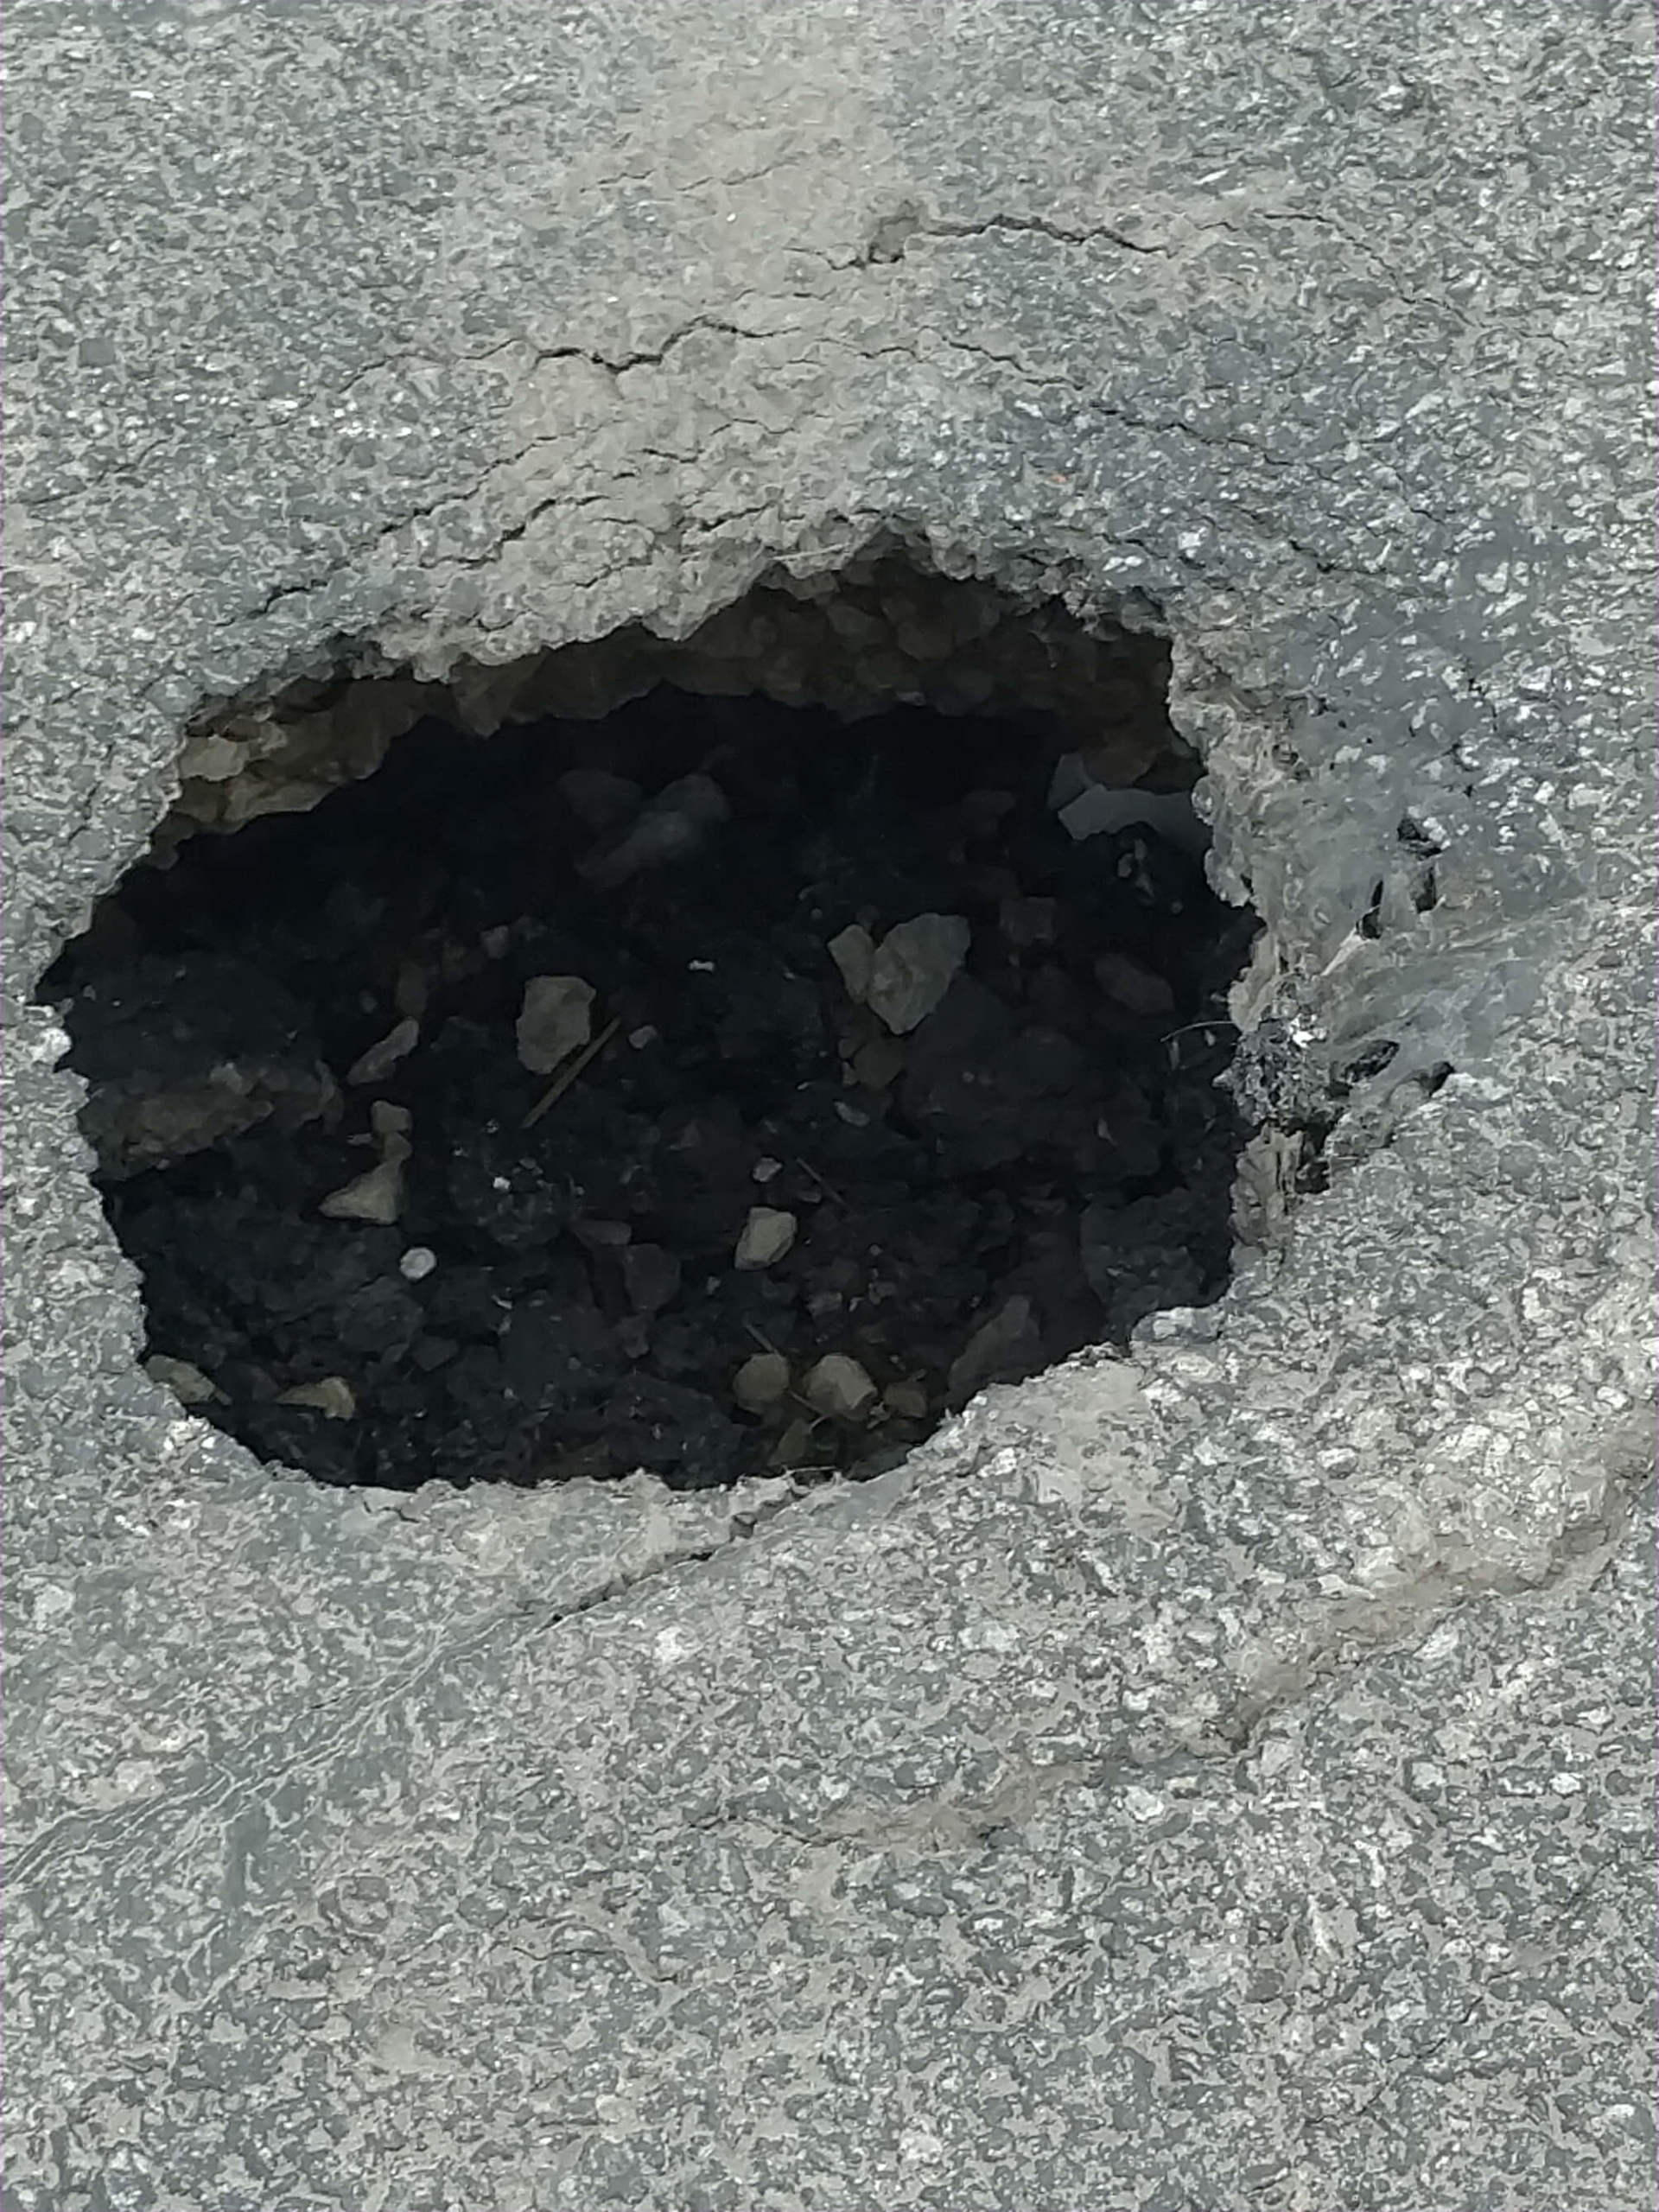 Pothole leading to a drain in need of repair in Sandusky, Ohio..